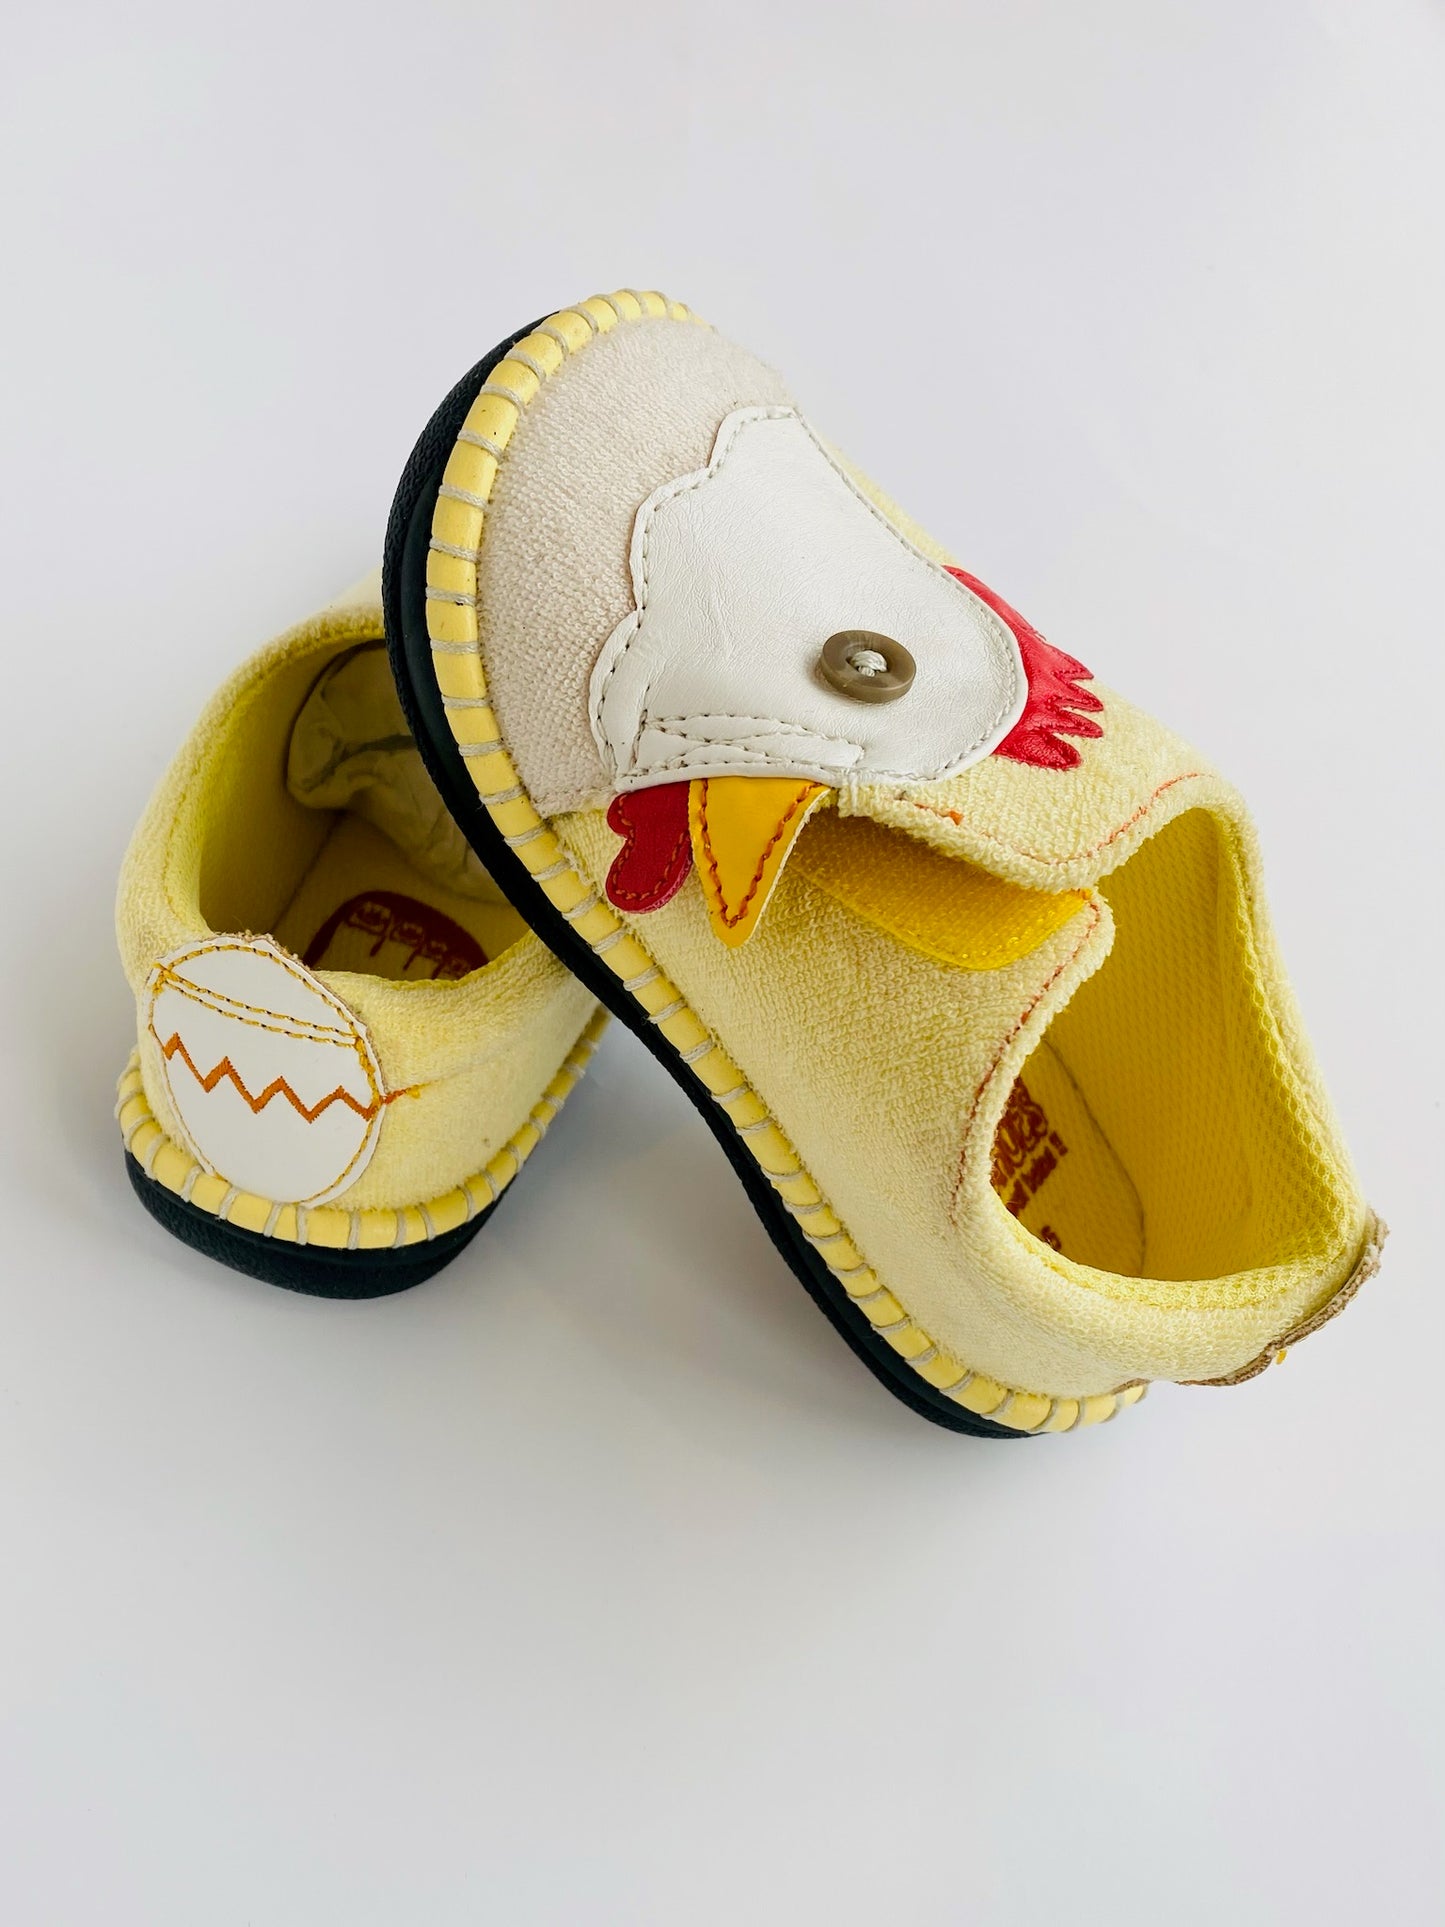 chicken shoes